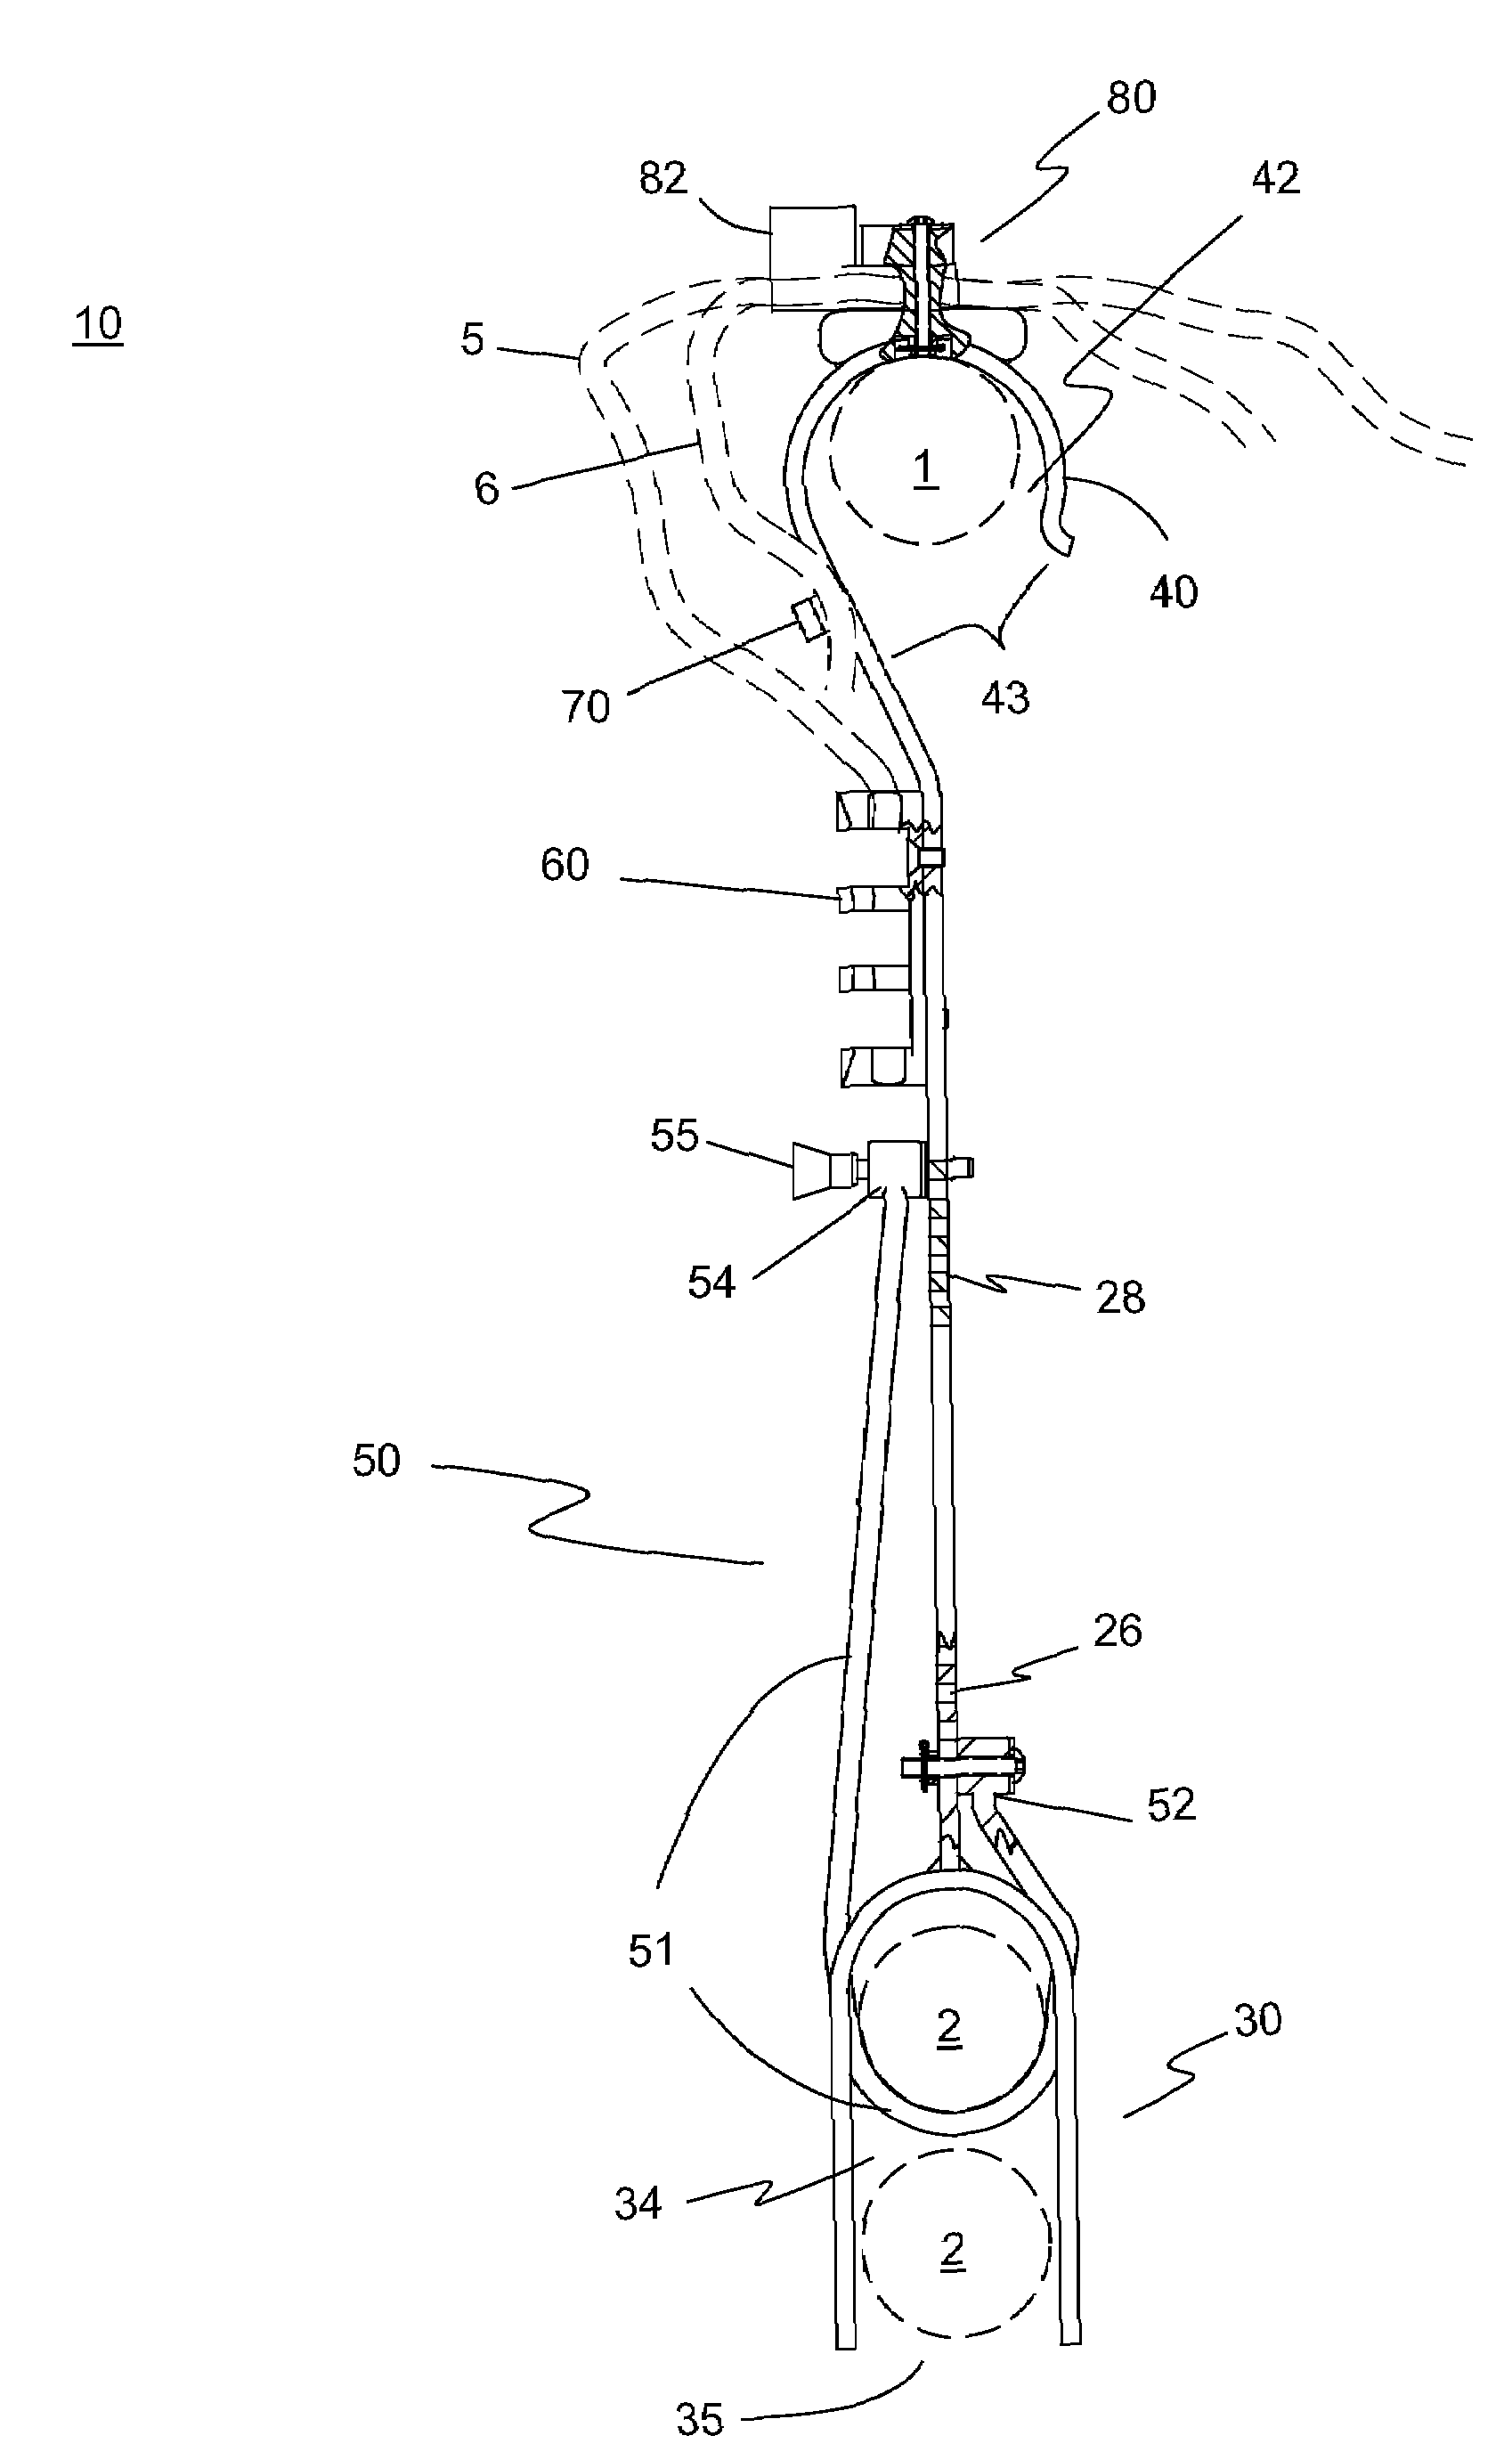 Cable management and tie-off apparatus